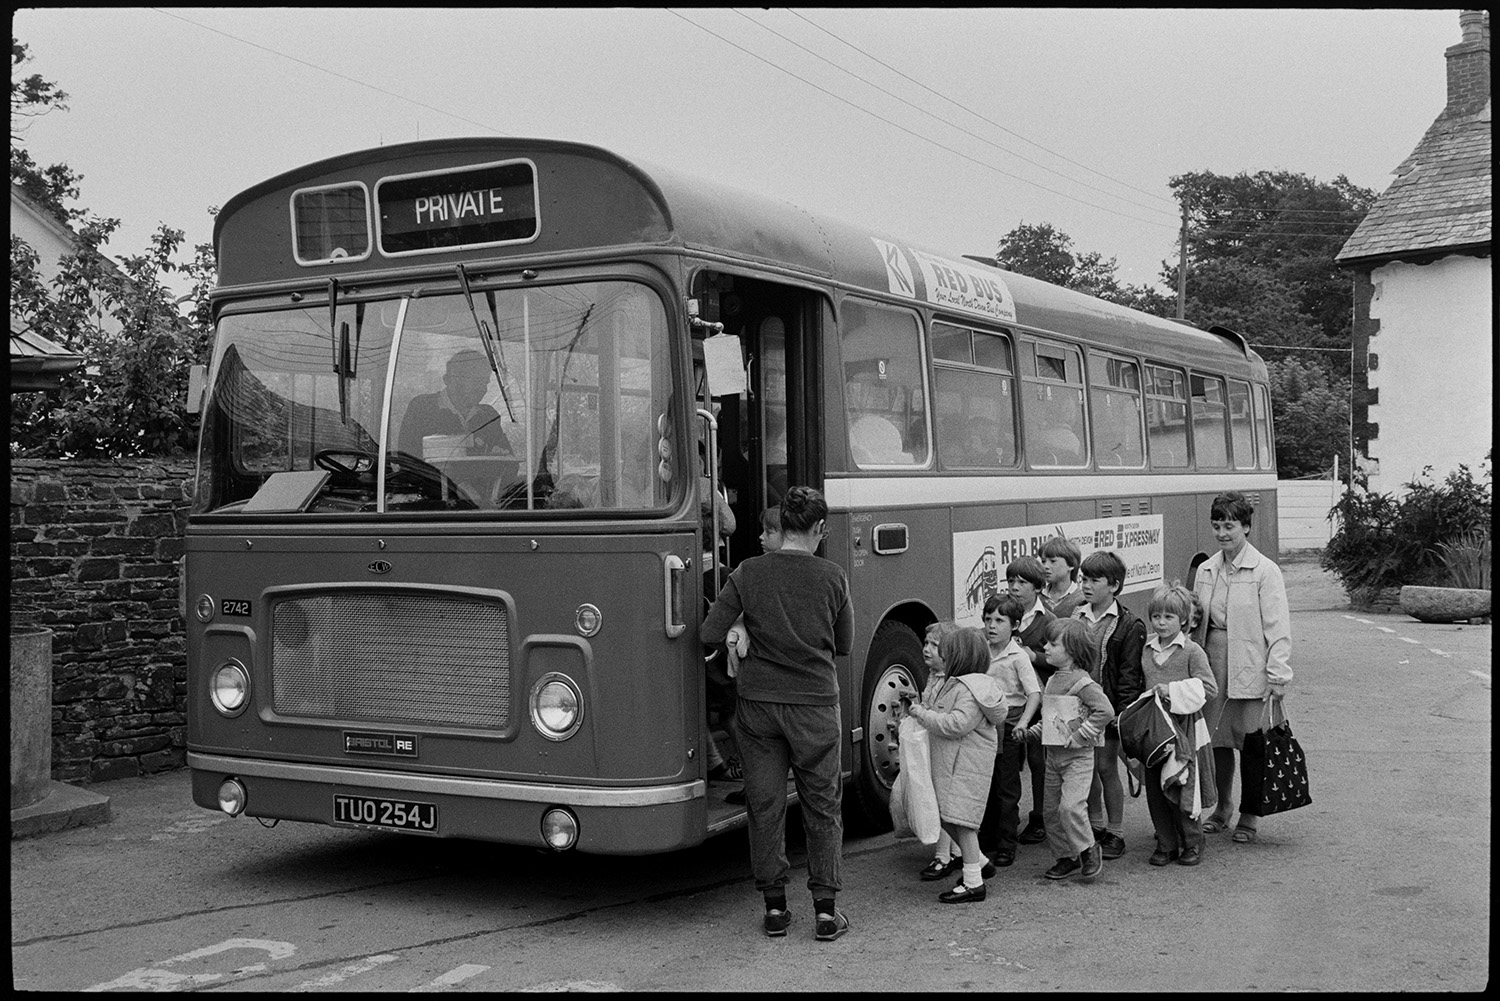 Schoolchildren getting onto bus for trip.
[A group of children from Dolton Primary School and two women, possibly teachers, getting a Red Bus Company bus parked in the bus stop in Dolton, to go on a school trip.]